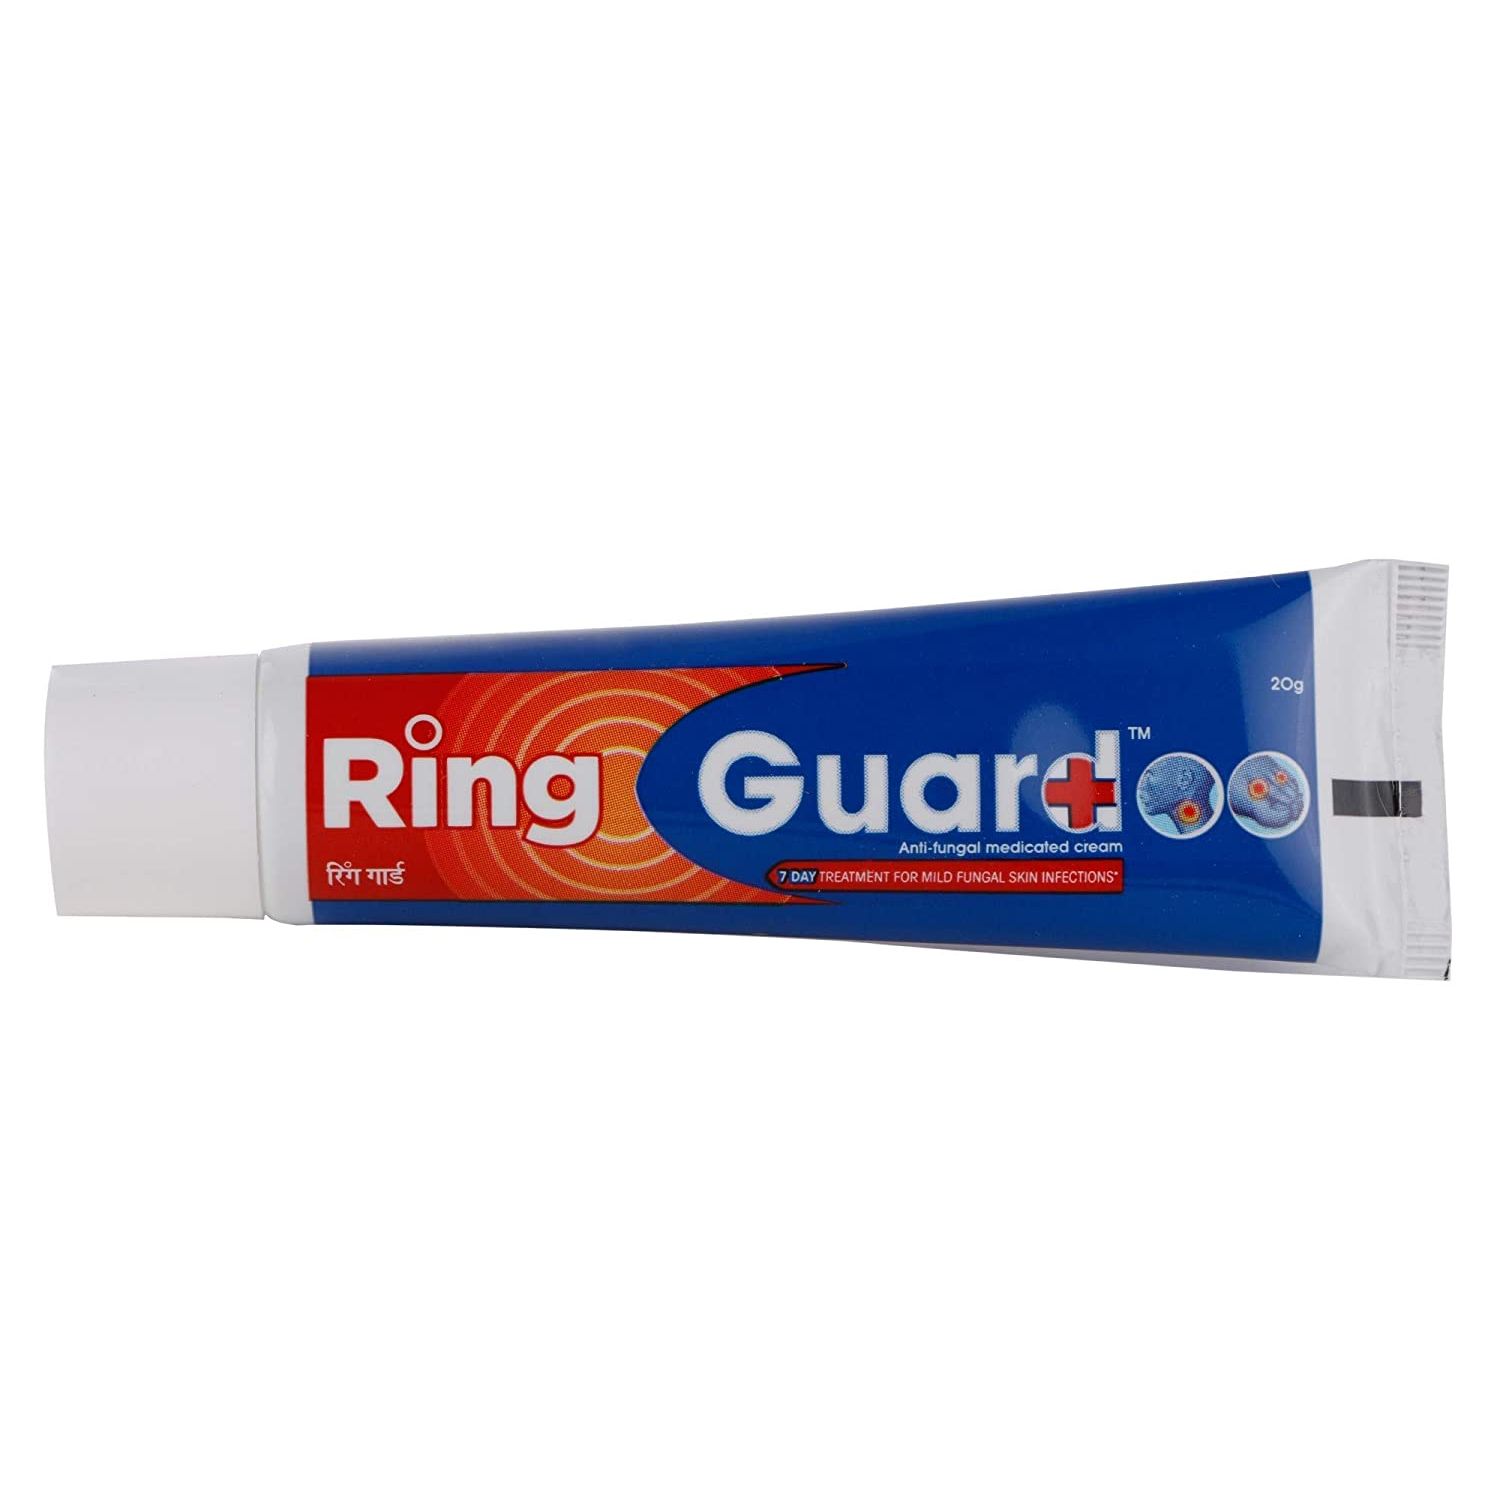 Ring guard medicated treatment for ringworm review in hindi | ring guard  cream review | Ashish Kumar - YouTube